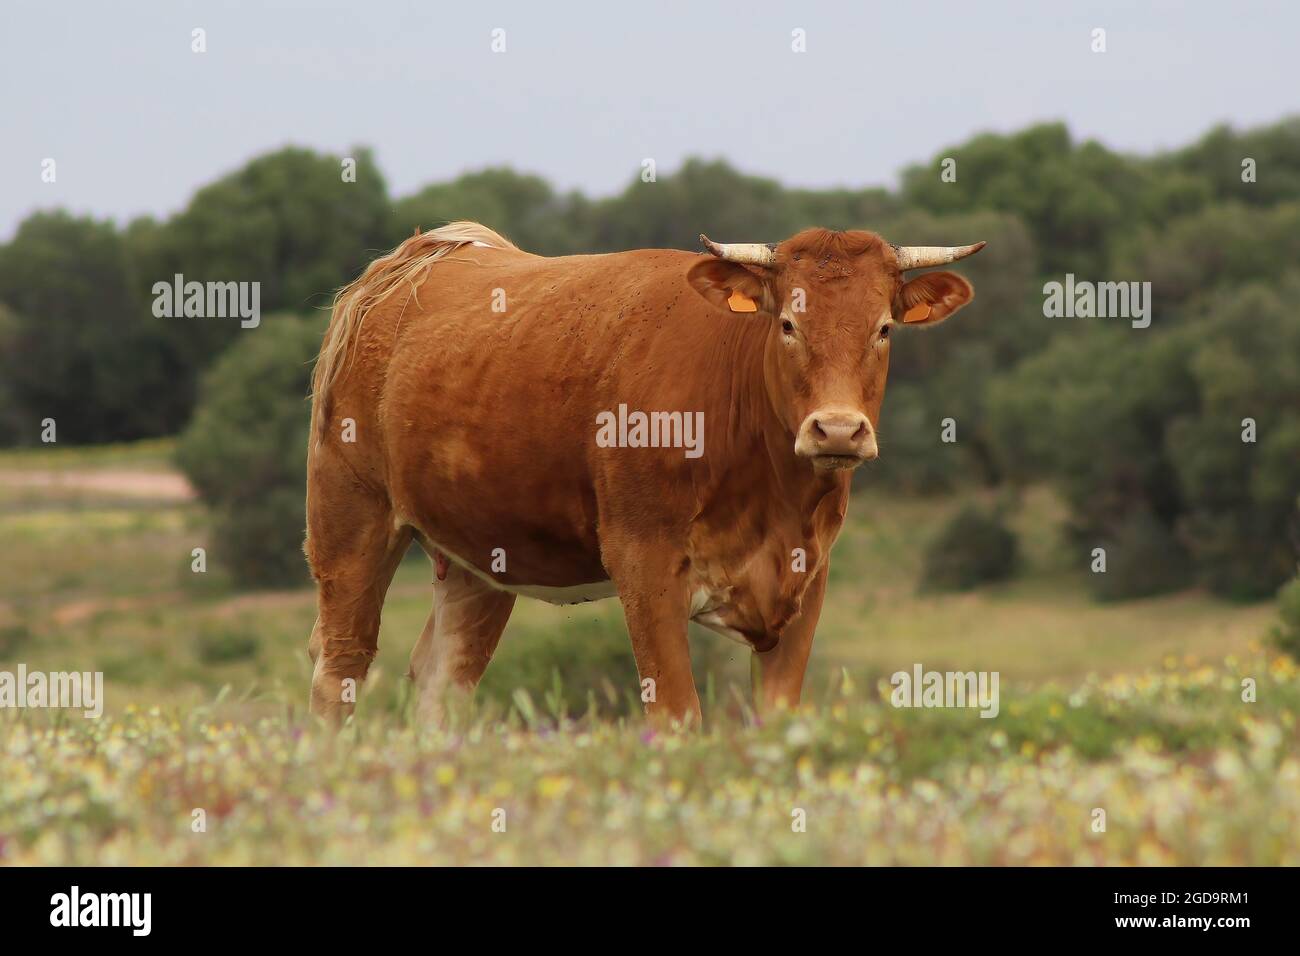 Cow in Donana National Park, Donana nature reserve. wetlands or marsh cow. Cow of Marshes Stock Photo